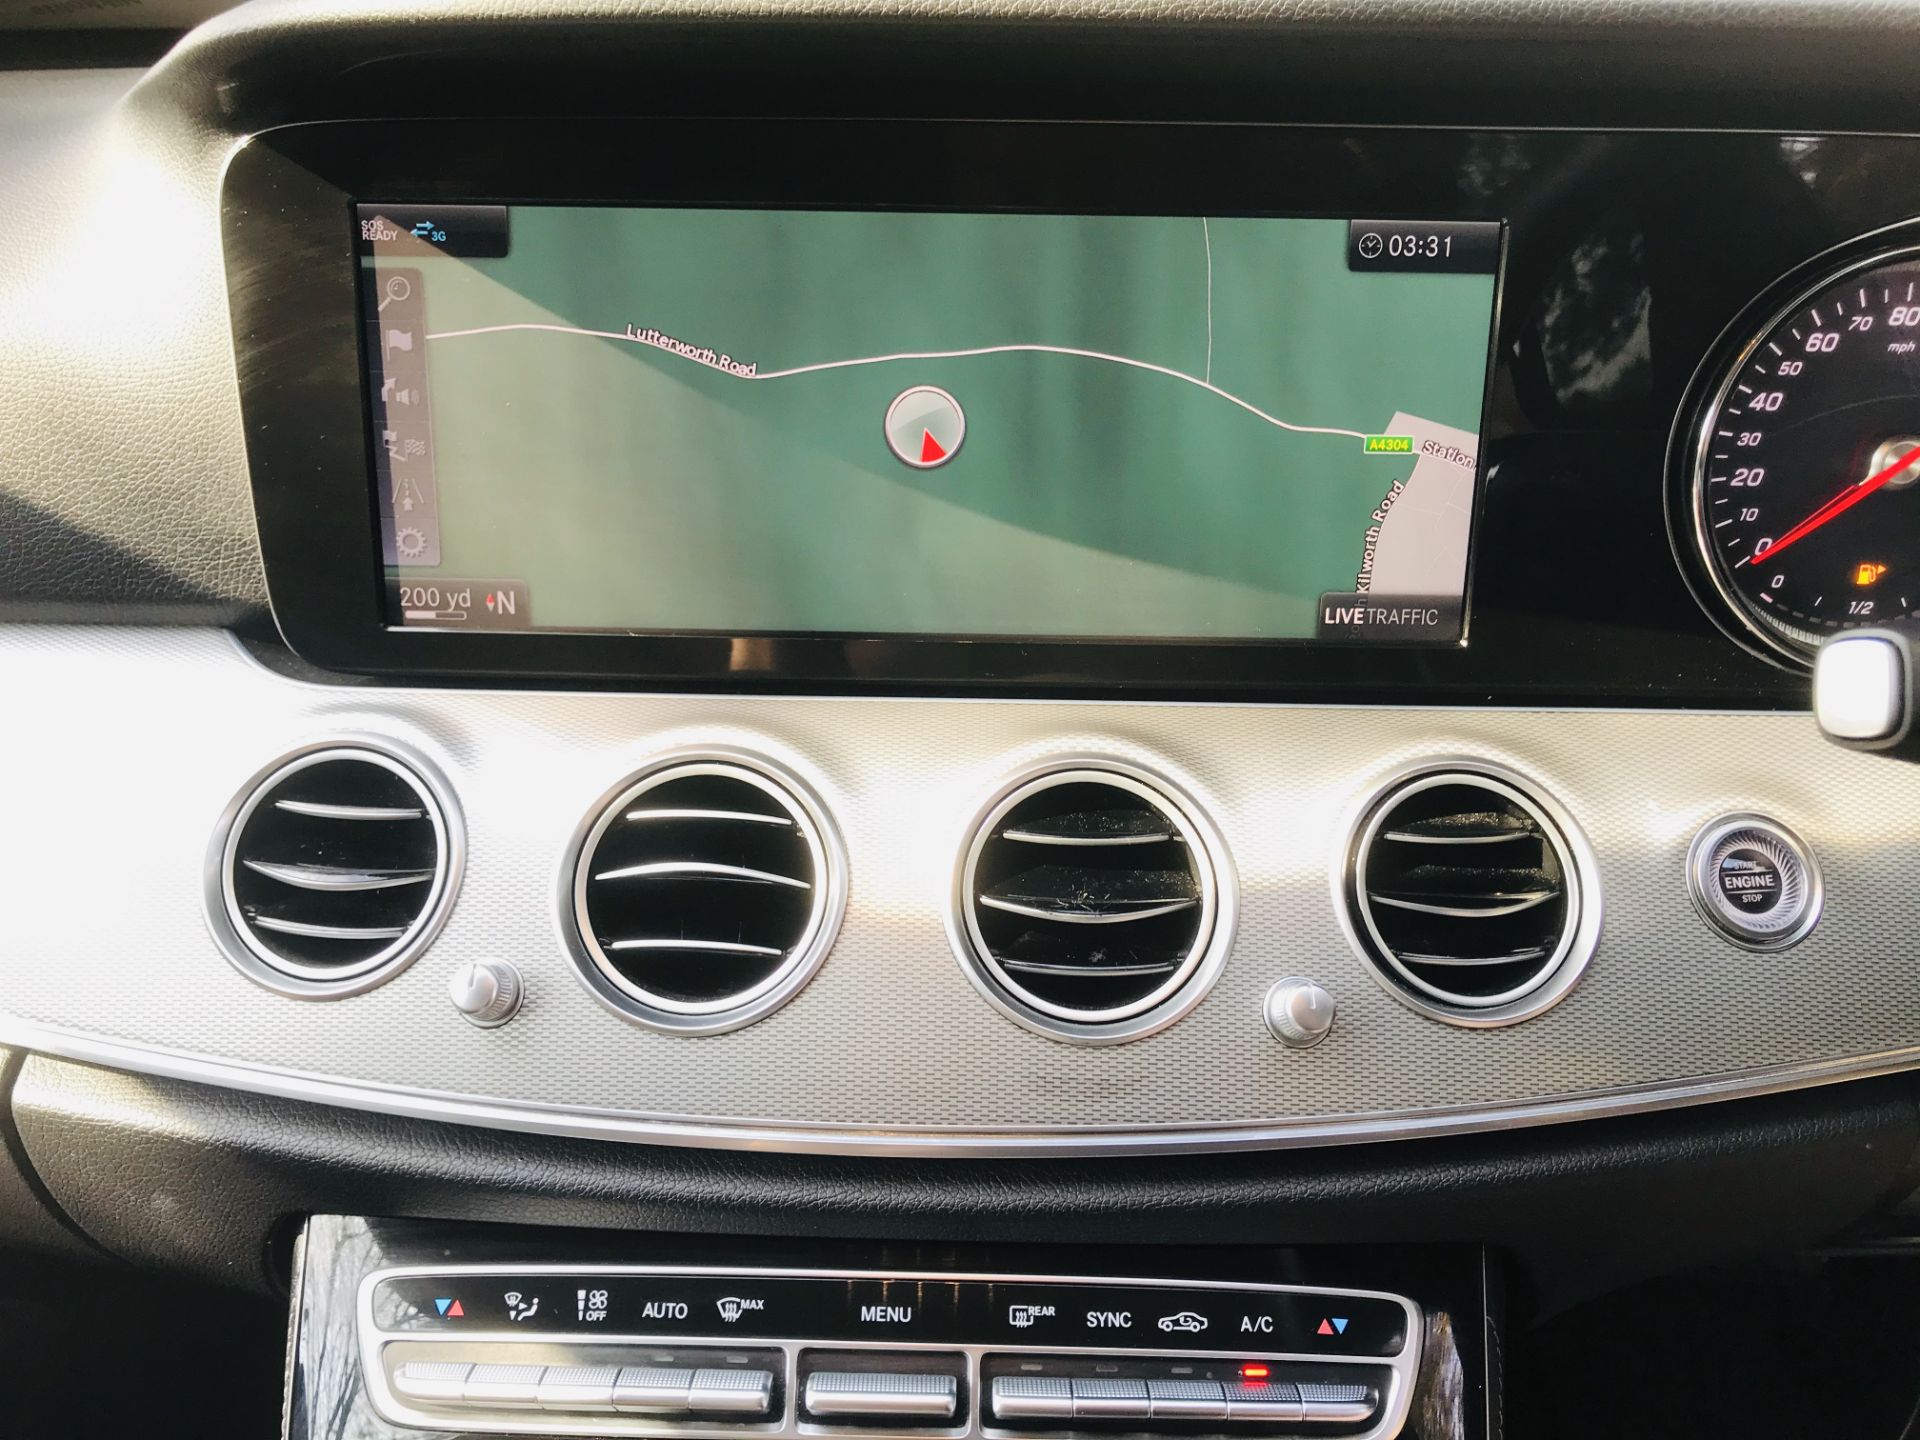 On Sale MERCEDES E220d "SPECIAL EQUIPMENT" 9G TRONIC (2019 MODEL) 1 OWNER - SAT NAV - LEATHER - WOW! - Image 23 of 26